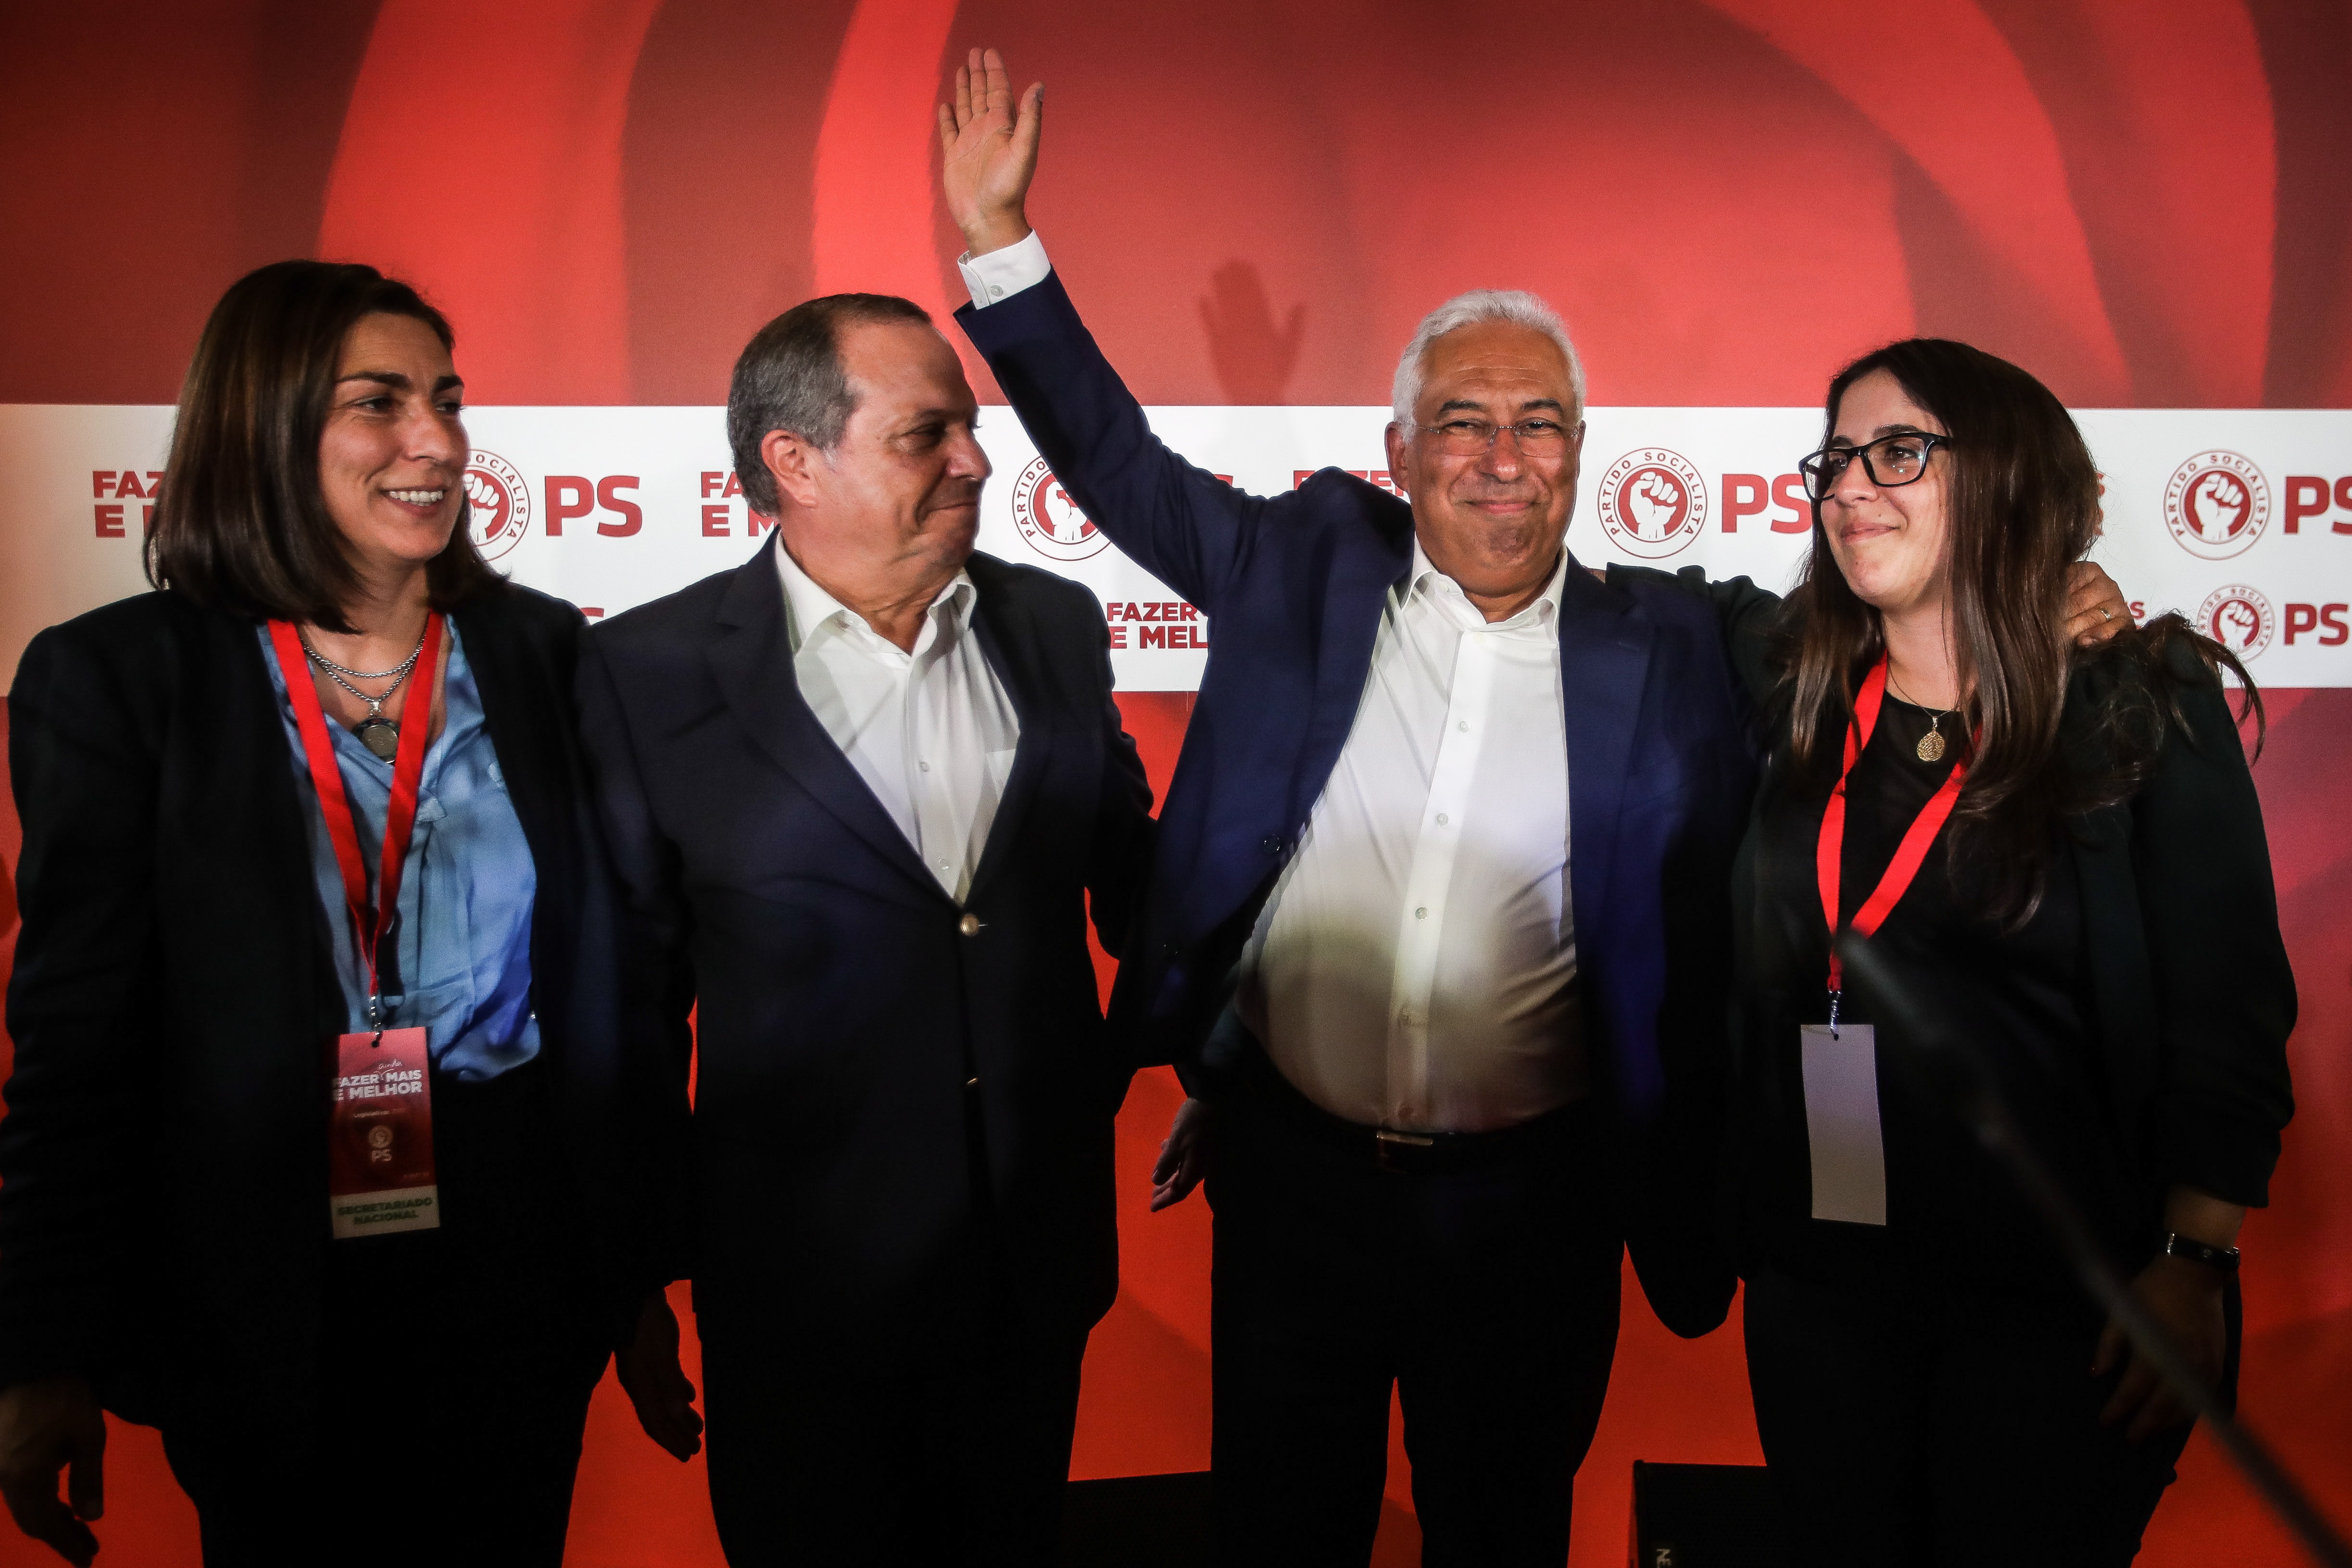 epa07902583 Portuguese Prime Minister and secretary general of the Socialist Party (PS), Antonio Costa (2-R), along with party members Ana Catarina Mendes (L) and Carlos Cesar (2L), celebrate after winning the legislative elections, in Lisbon, Portugal, 06 October 2019. More than 10.8 million registered voters were called to the polls to elect the 230 deputies for the next legislature and from where the XXII Constitutional Government will take place.  EPA/MARIO CRUZ